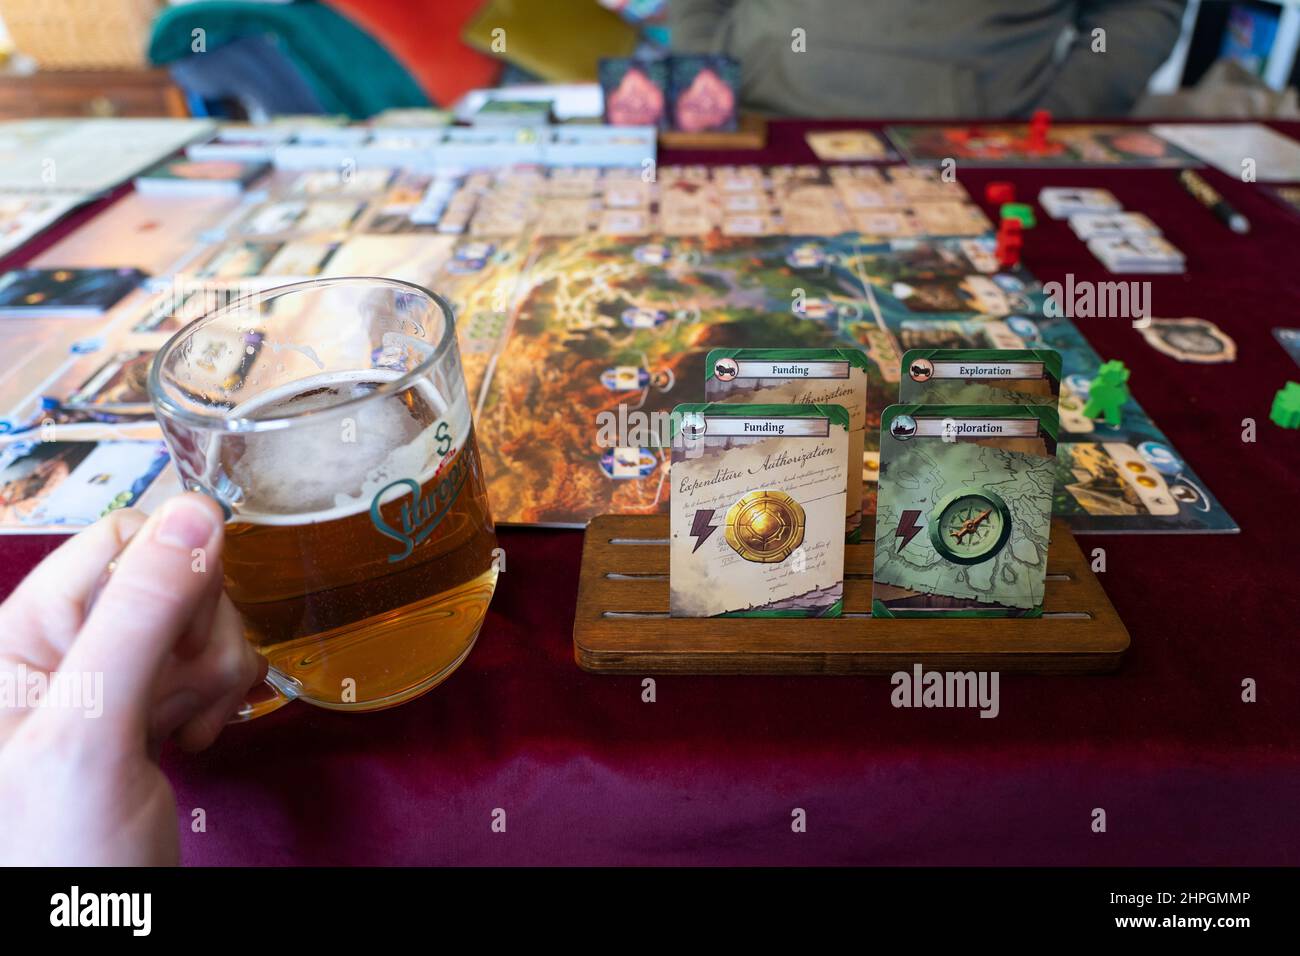 A 40 year old man drinking a beer and looking at his cards for playing the Lost Ruins of Arnak board game. Theme: adult gaming and hobbies. UK Stock Photo